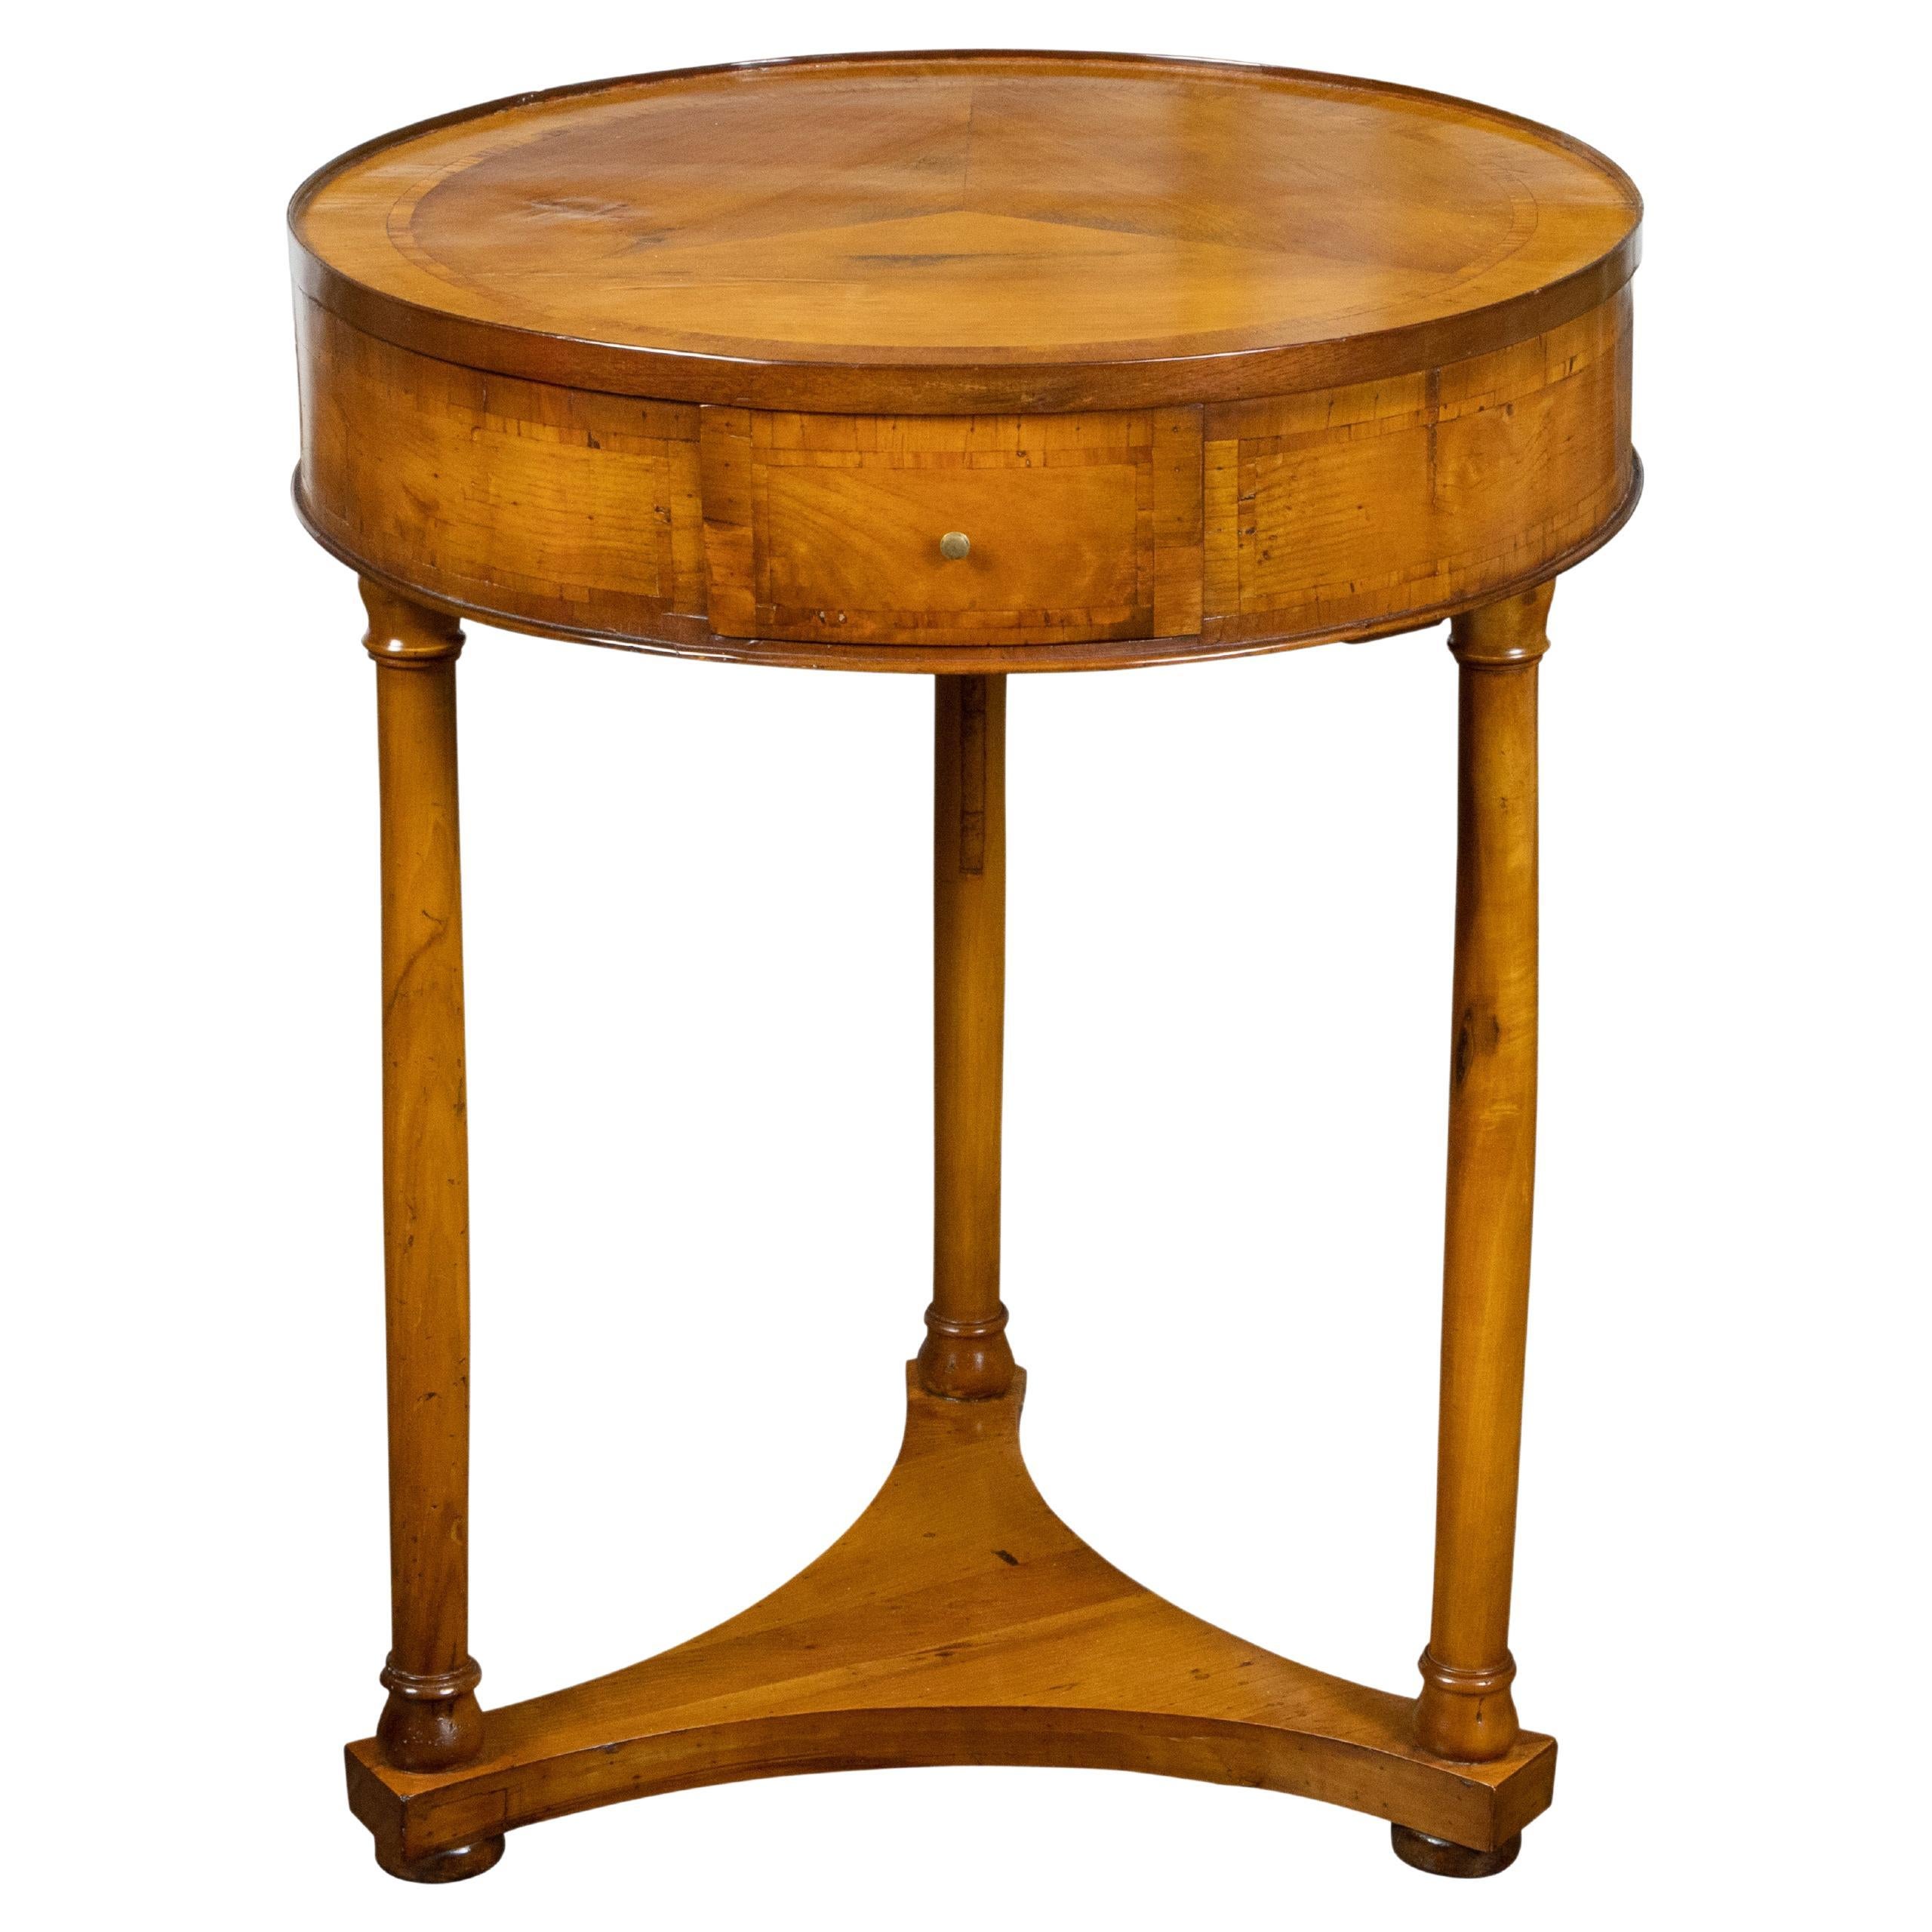 Biedermeier Period 1840s Table with Round Top, Three Drawers and Column Legs